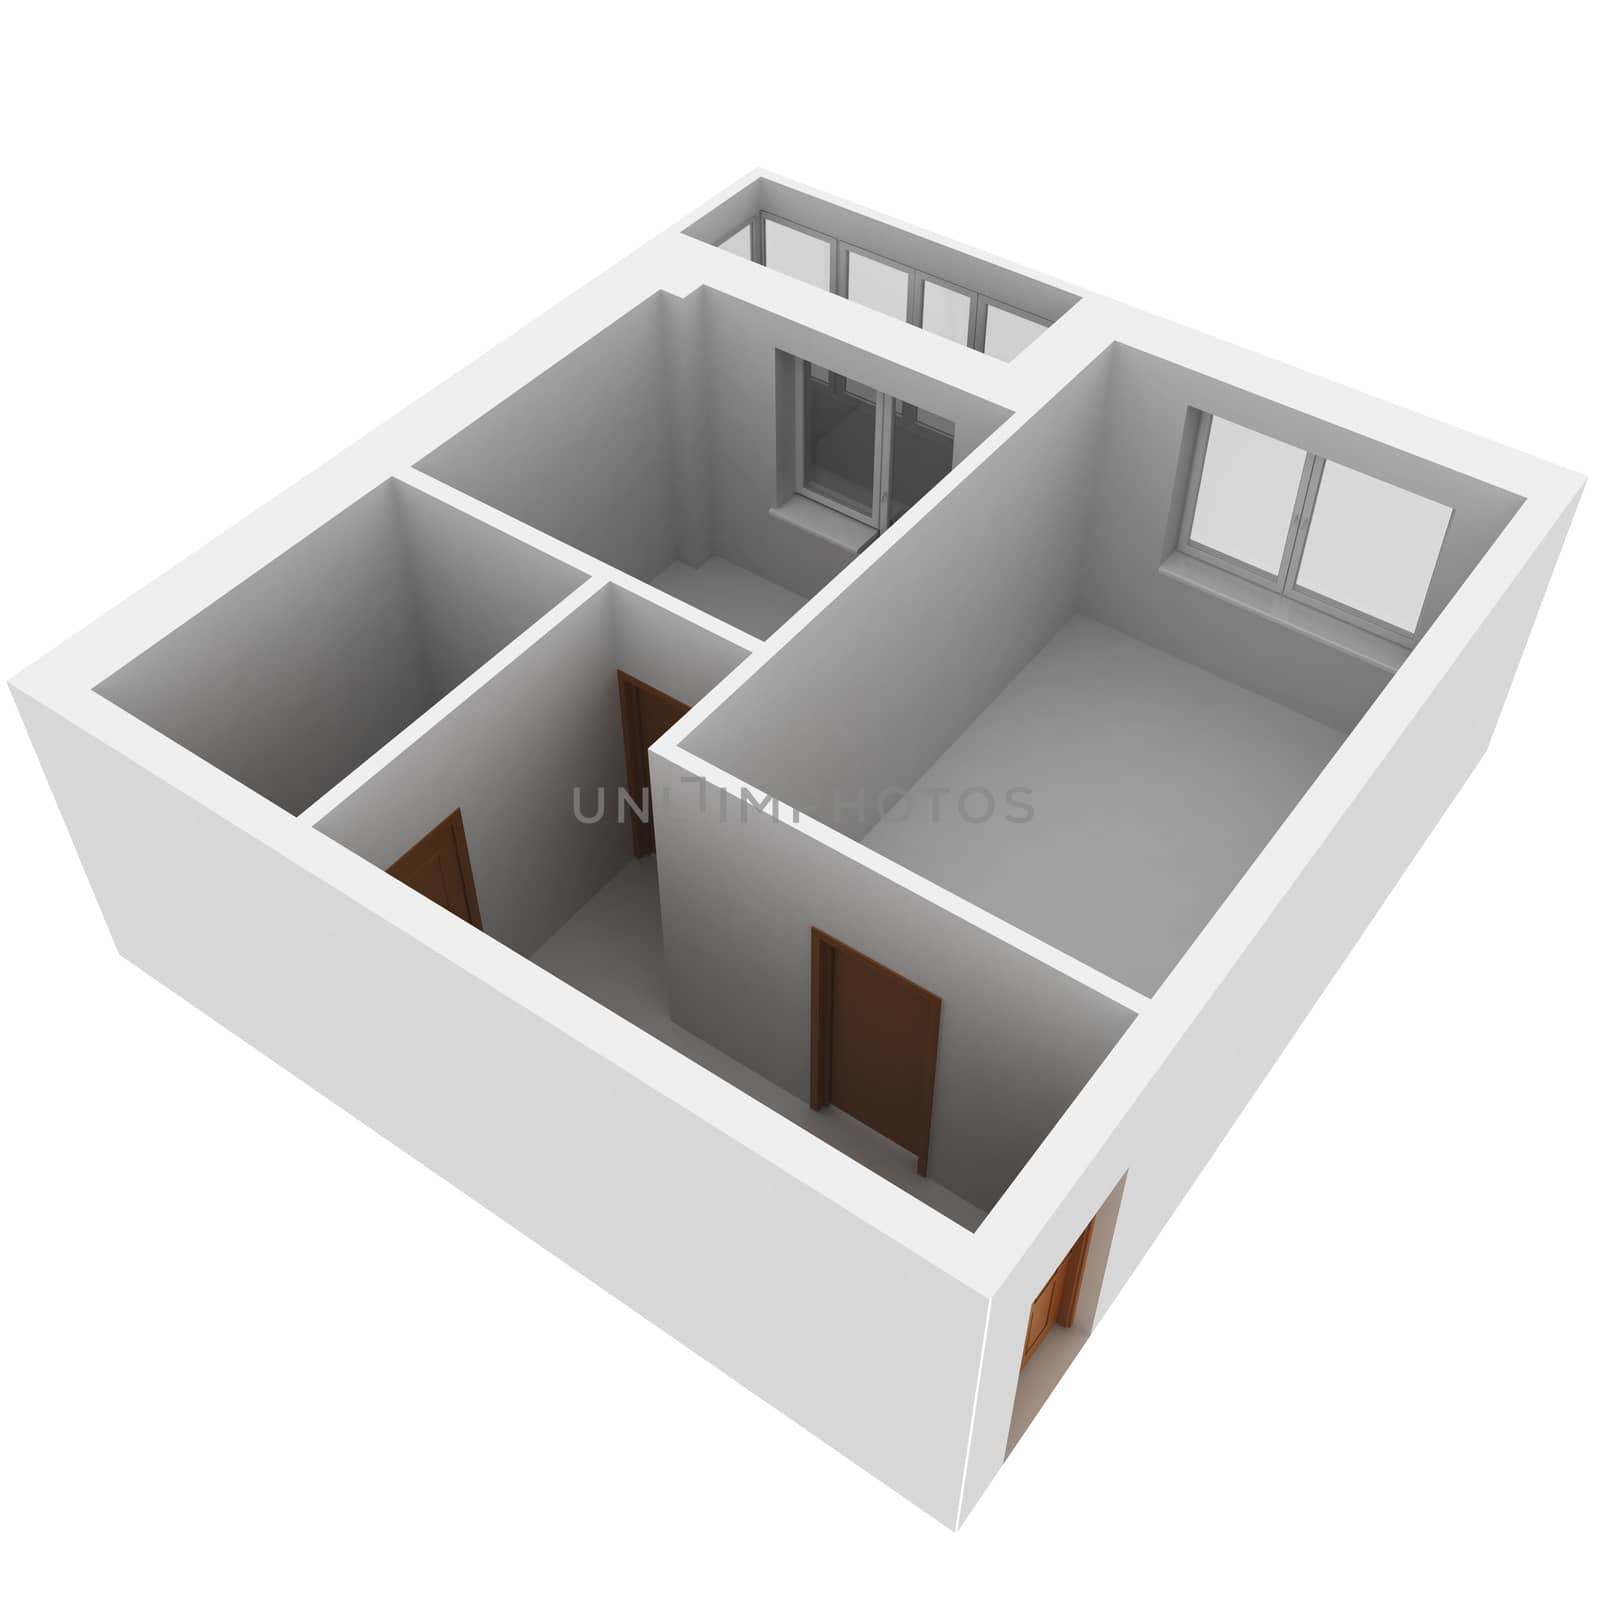 3d apartment plan. Isolated render on a white background